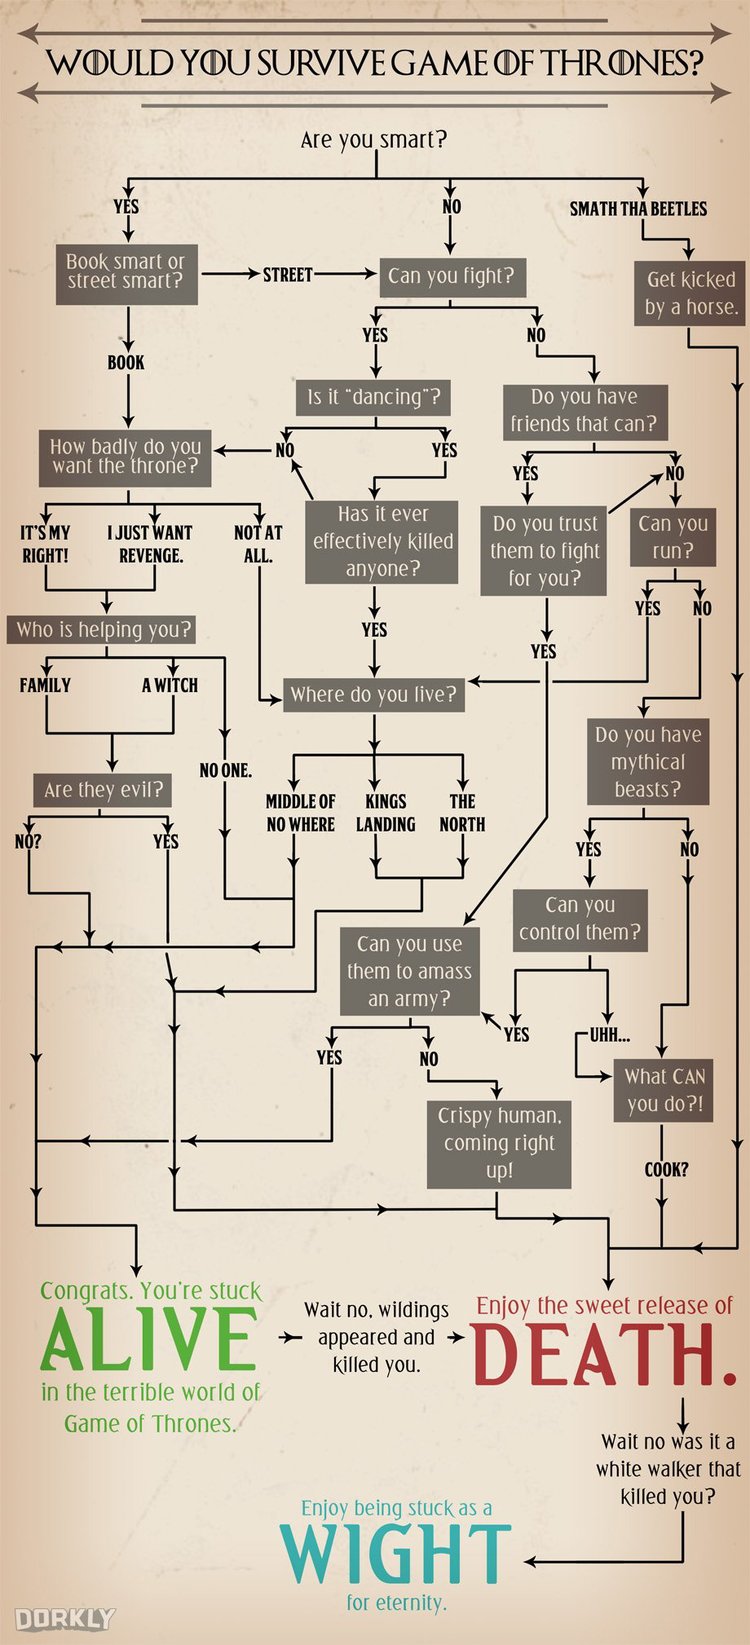 would-you-survive-game-of-thrones-this-flowchart-will-tell-you